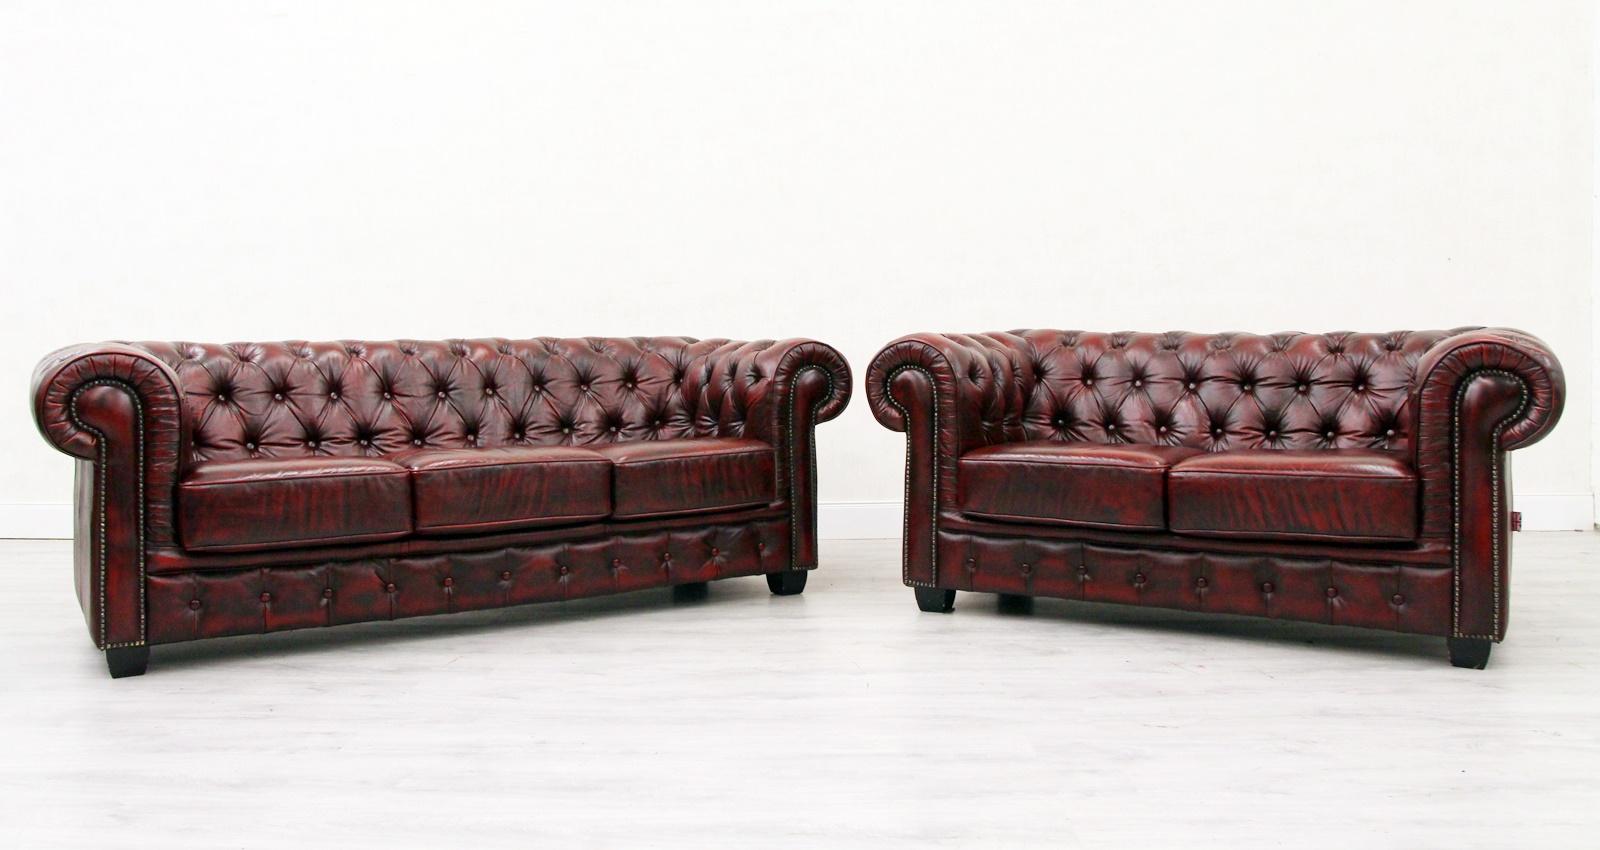 2 Chesterfield real leather sofa 2s-3s
in original design

Condition: The set is in a very good condition (Mint condition)
Sofa three-seat
H 78cm, L 220cm, D 95cm
Sofa two-seat
Height 78cm, length 170cm, depth 95cm
Upholstery is in a very